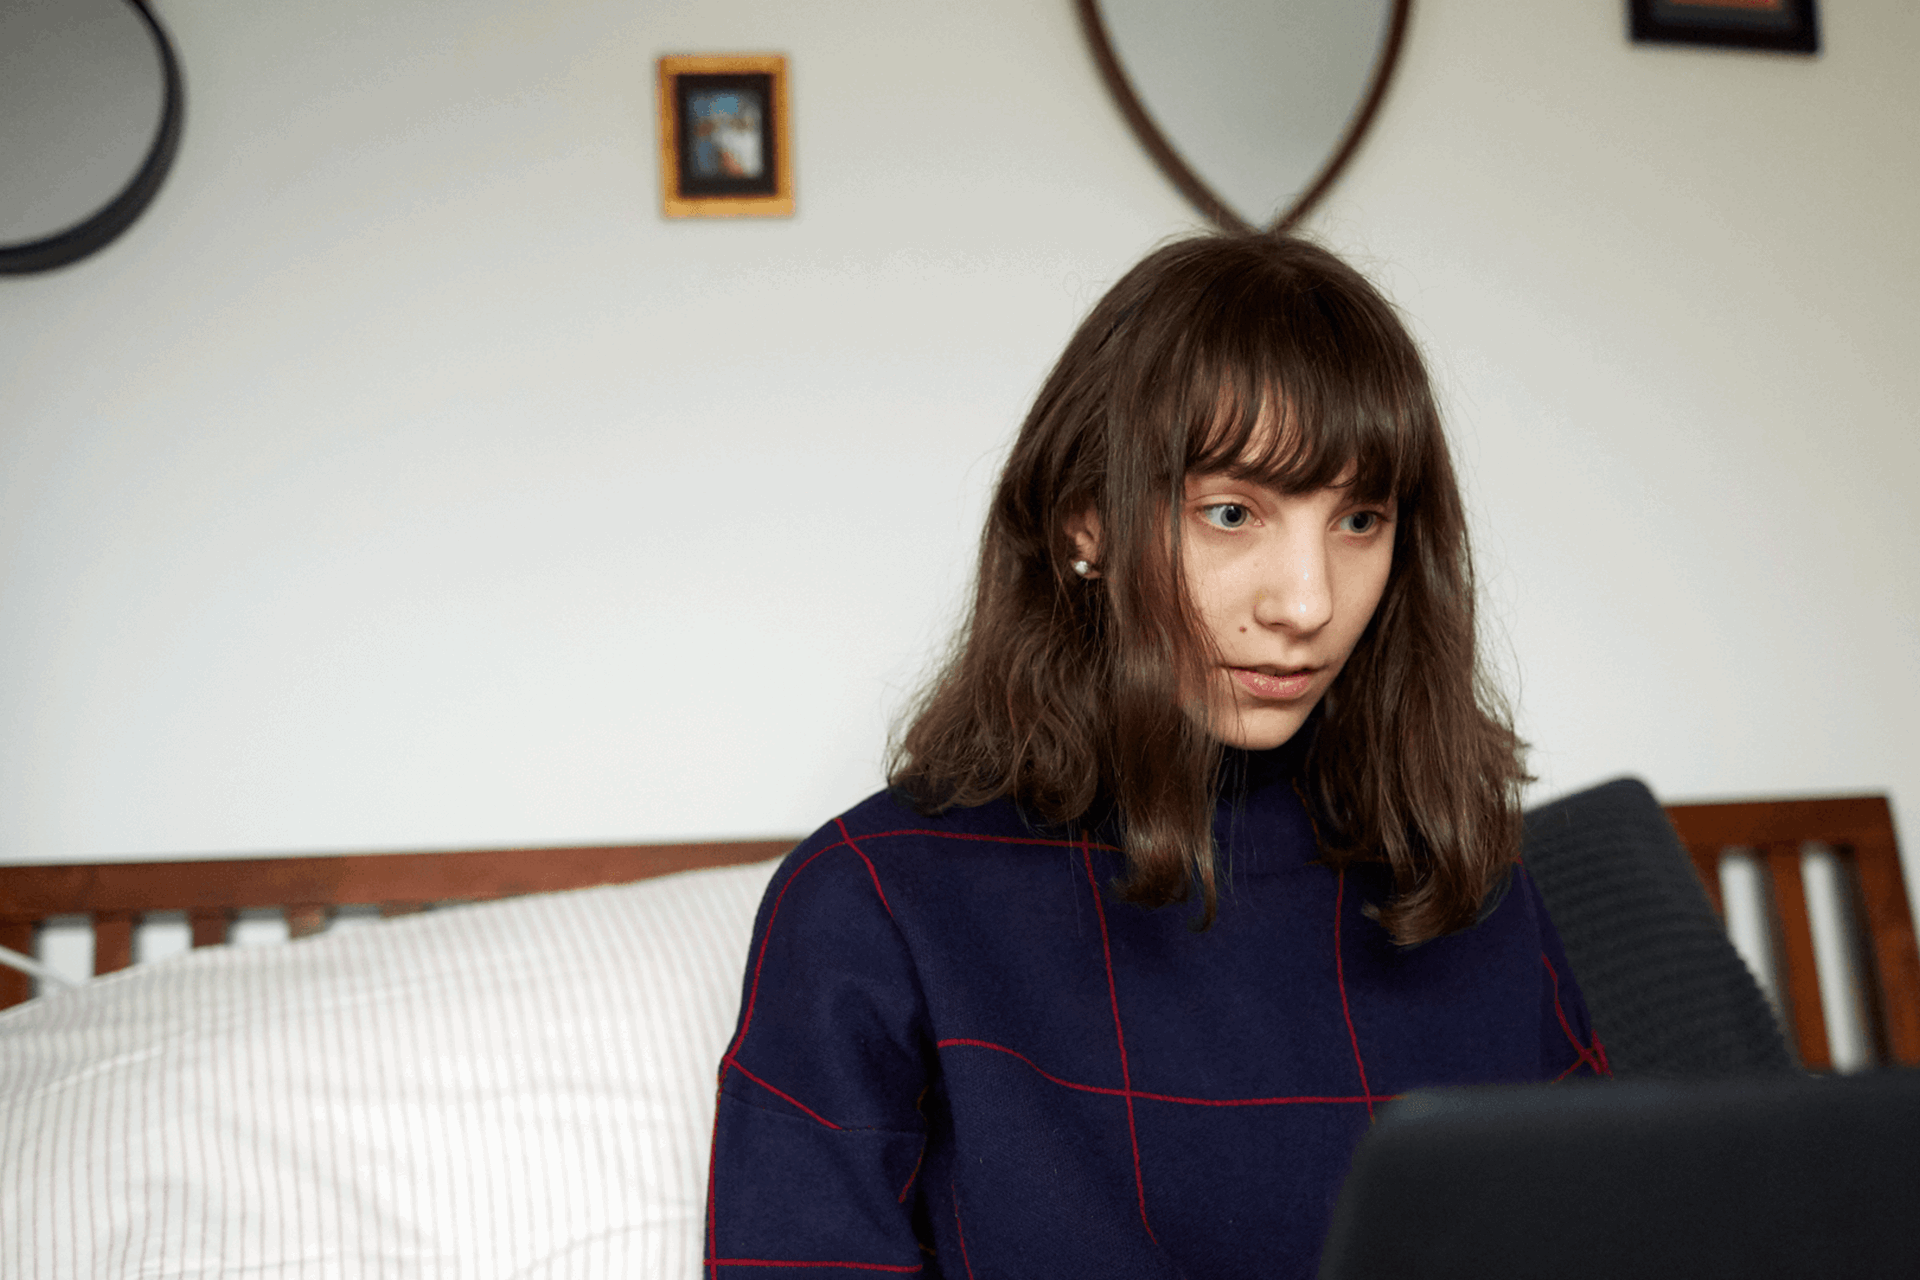 A girl sits on the end of her bed while looking at her laptop.